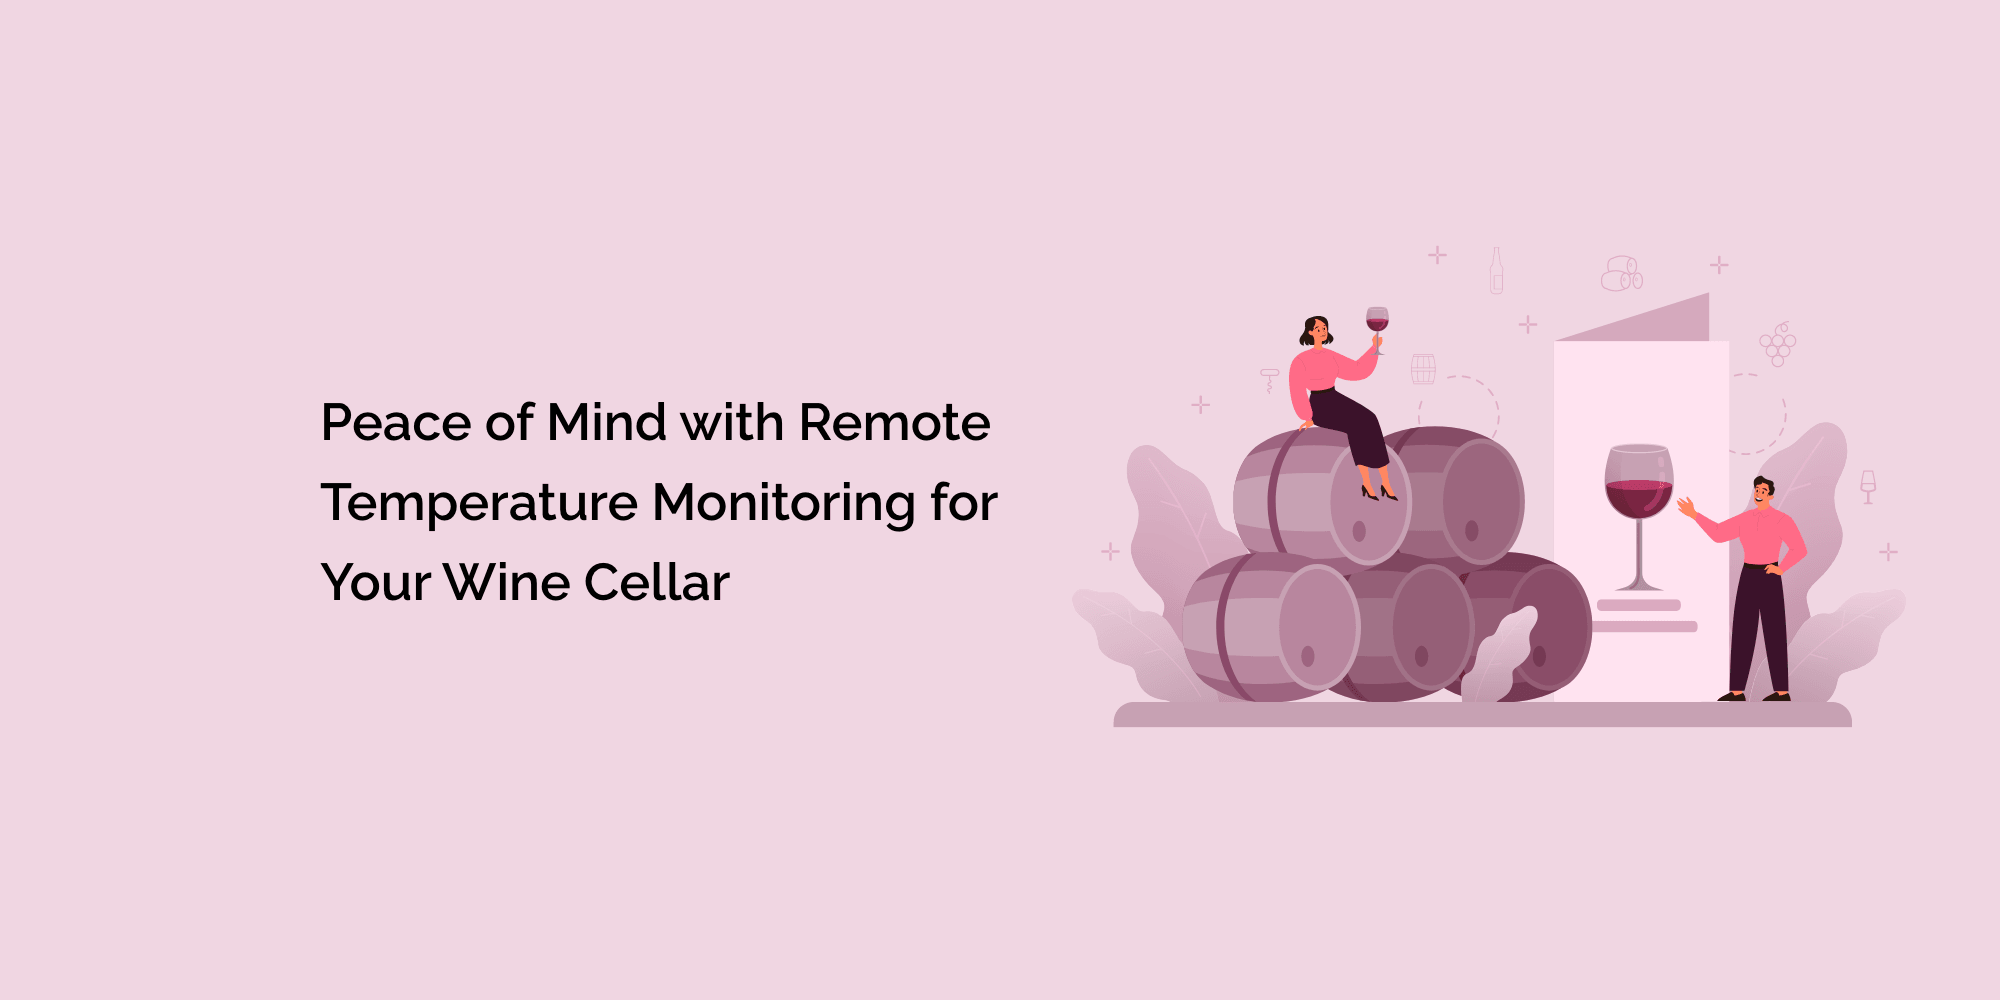 Peace of Mind with Remote Temperature Monitoring for Your Wine Cellar